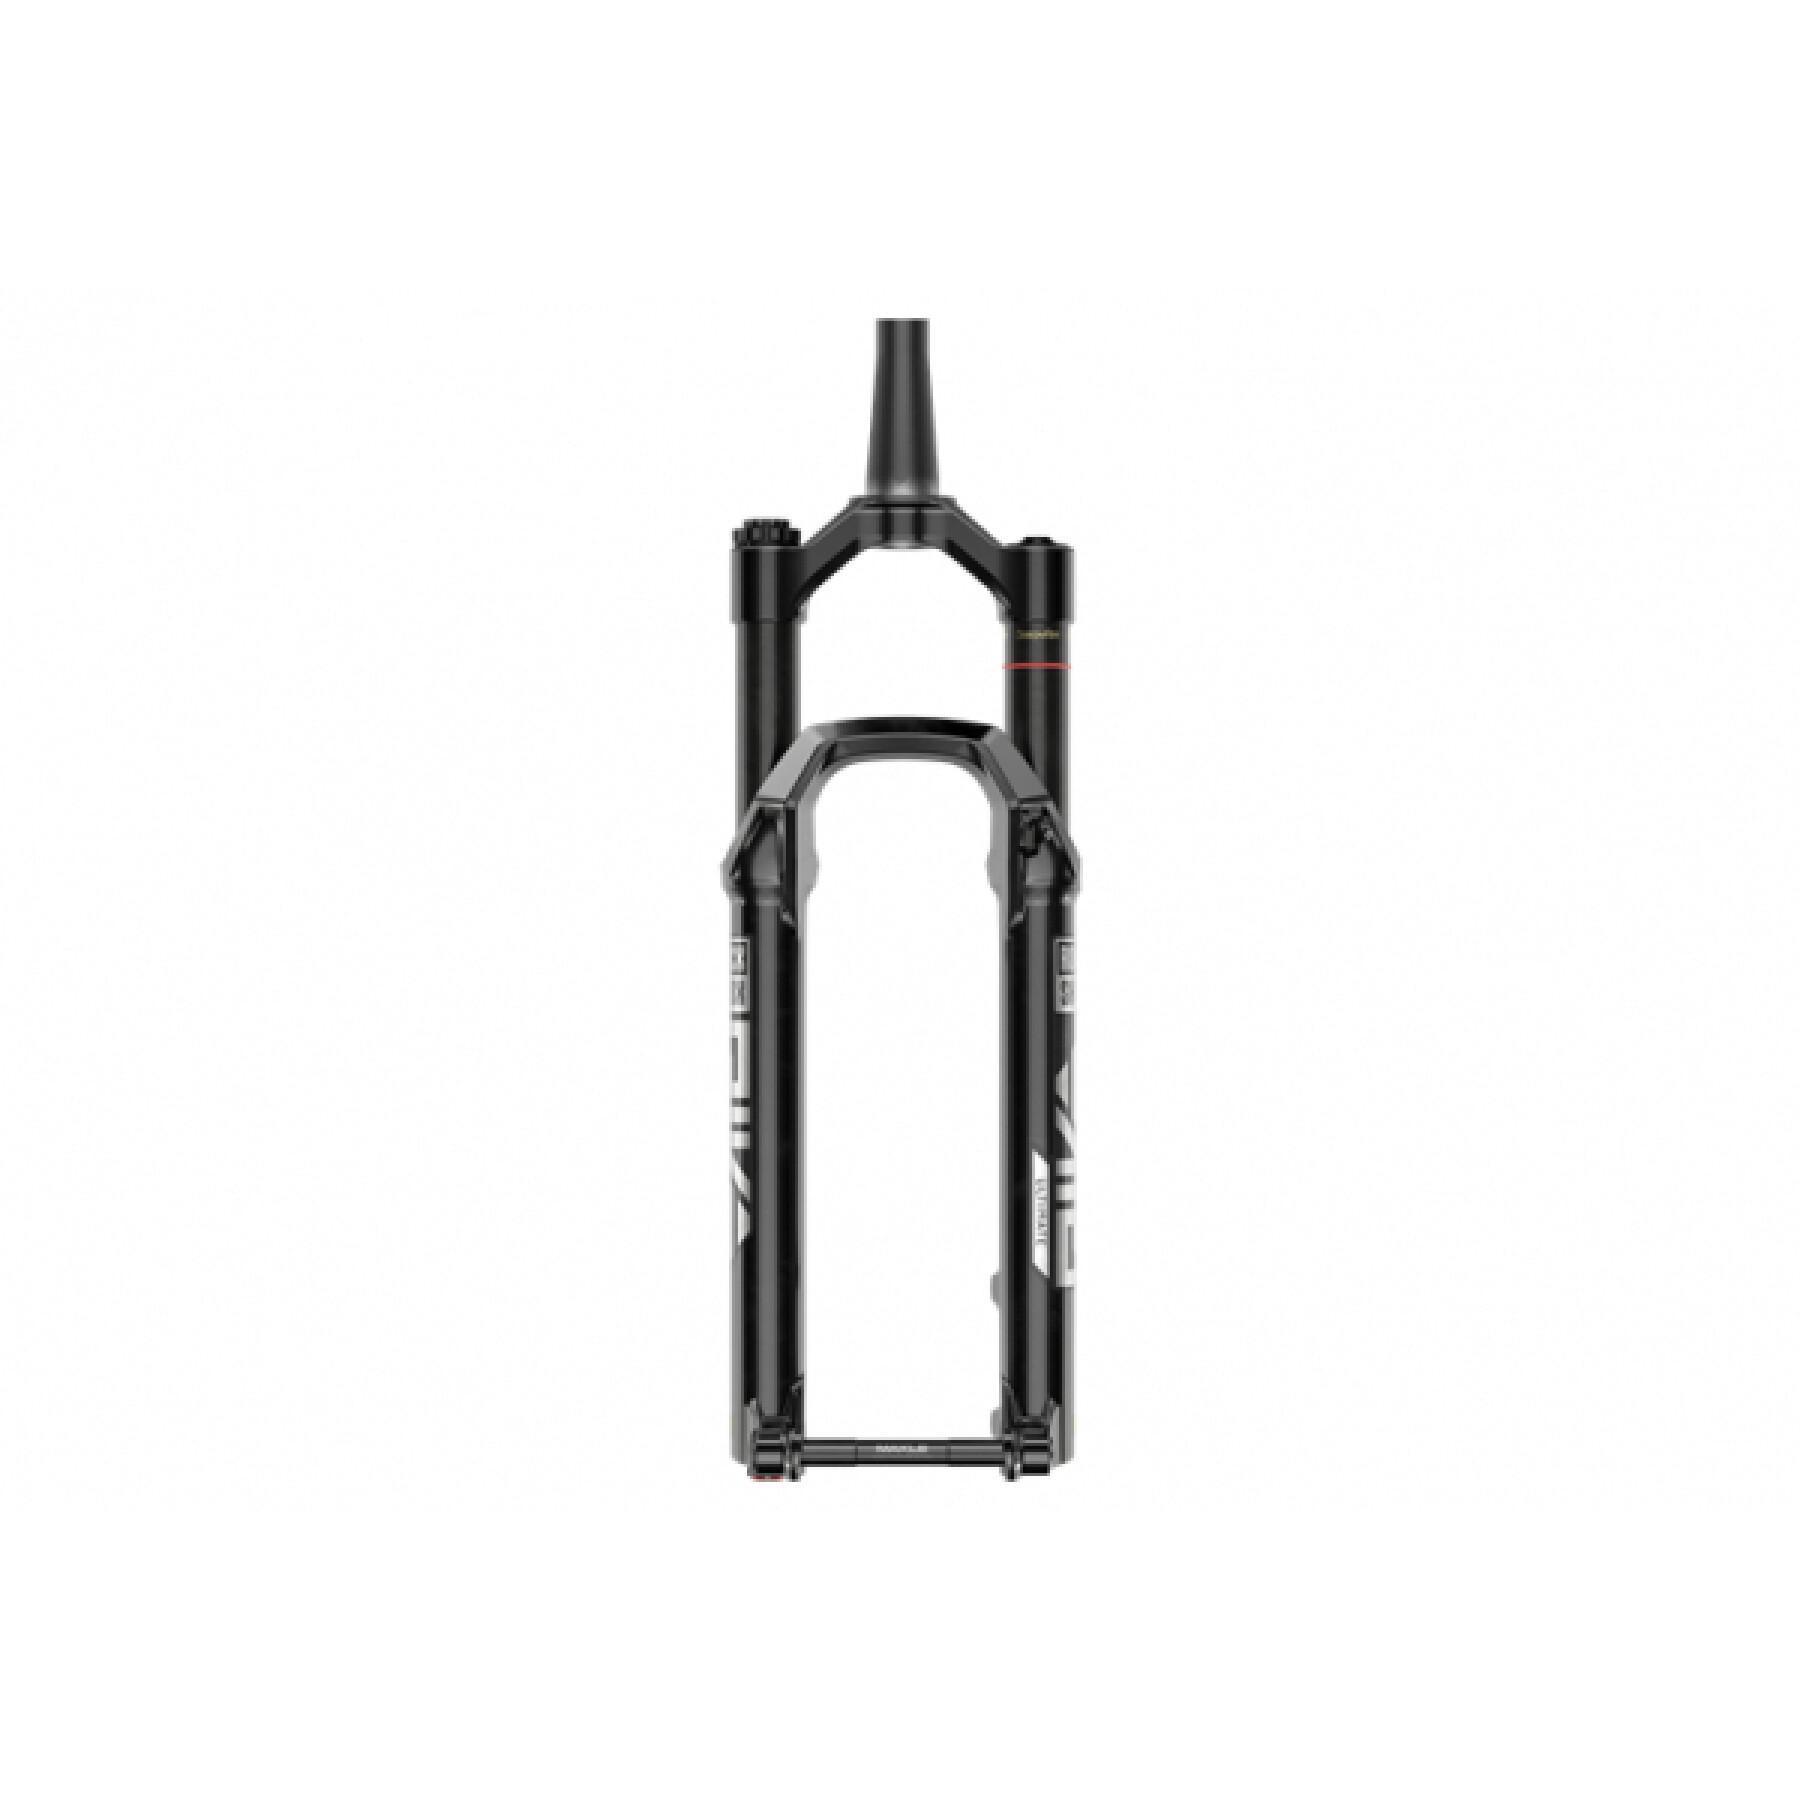 Fourche Rockshox Pike Ult.Charger 3 Rc2 29 Bo.140 44Of.Tpr Deb+